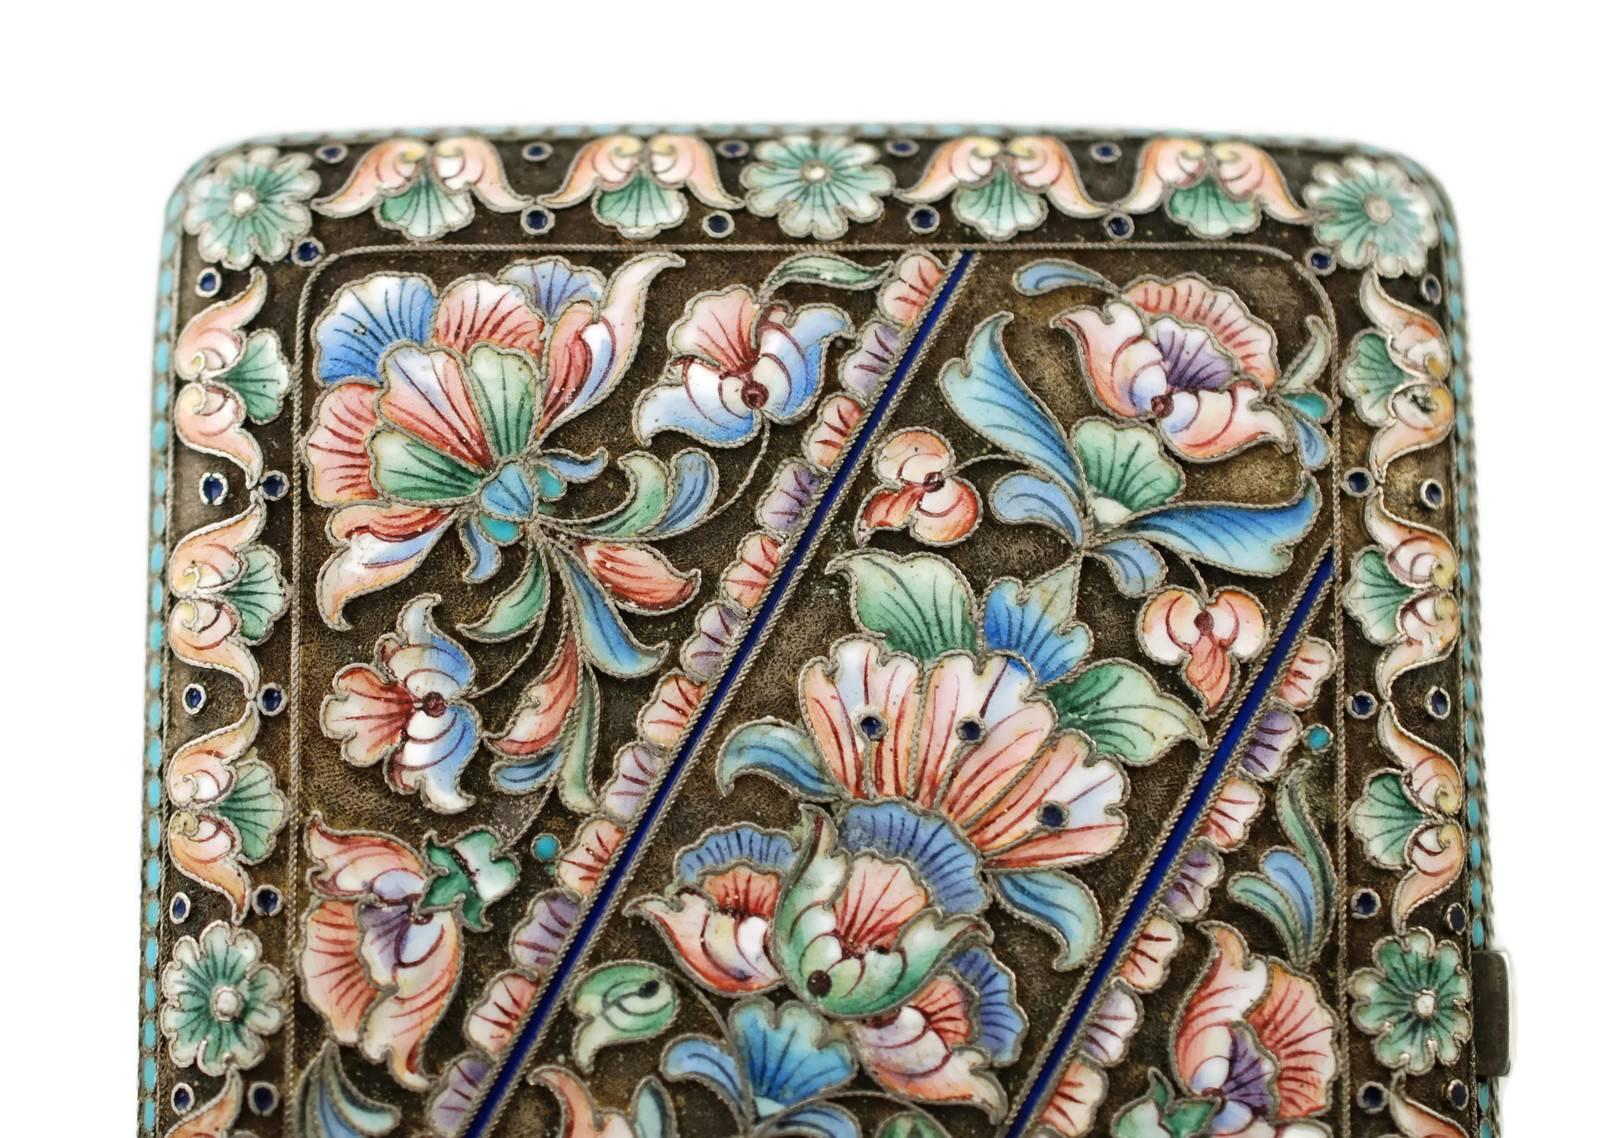 This elegant Russian Art Nouveau silver cigarette case has a rectangular form with rounded corners and features an ornate cloisonné enamel floral and foliate motif executed in shades of pink, blue and green with cobalt blue accents. The pattern is